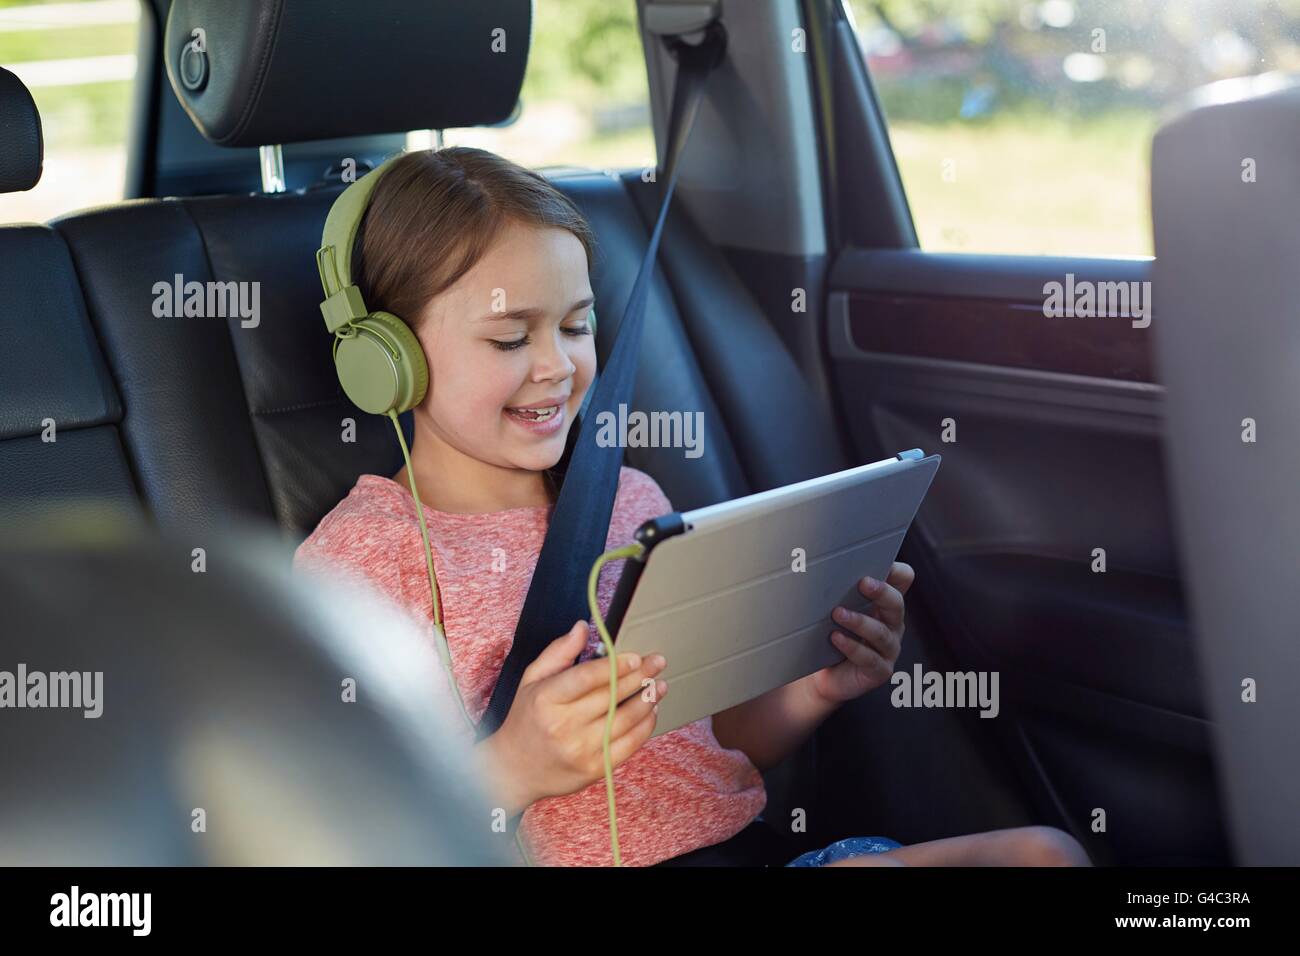 MODEL RELEASED. Girl in the back seat of the car wearing headphones, watching a movie. Stock Photo